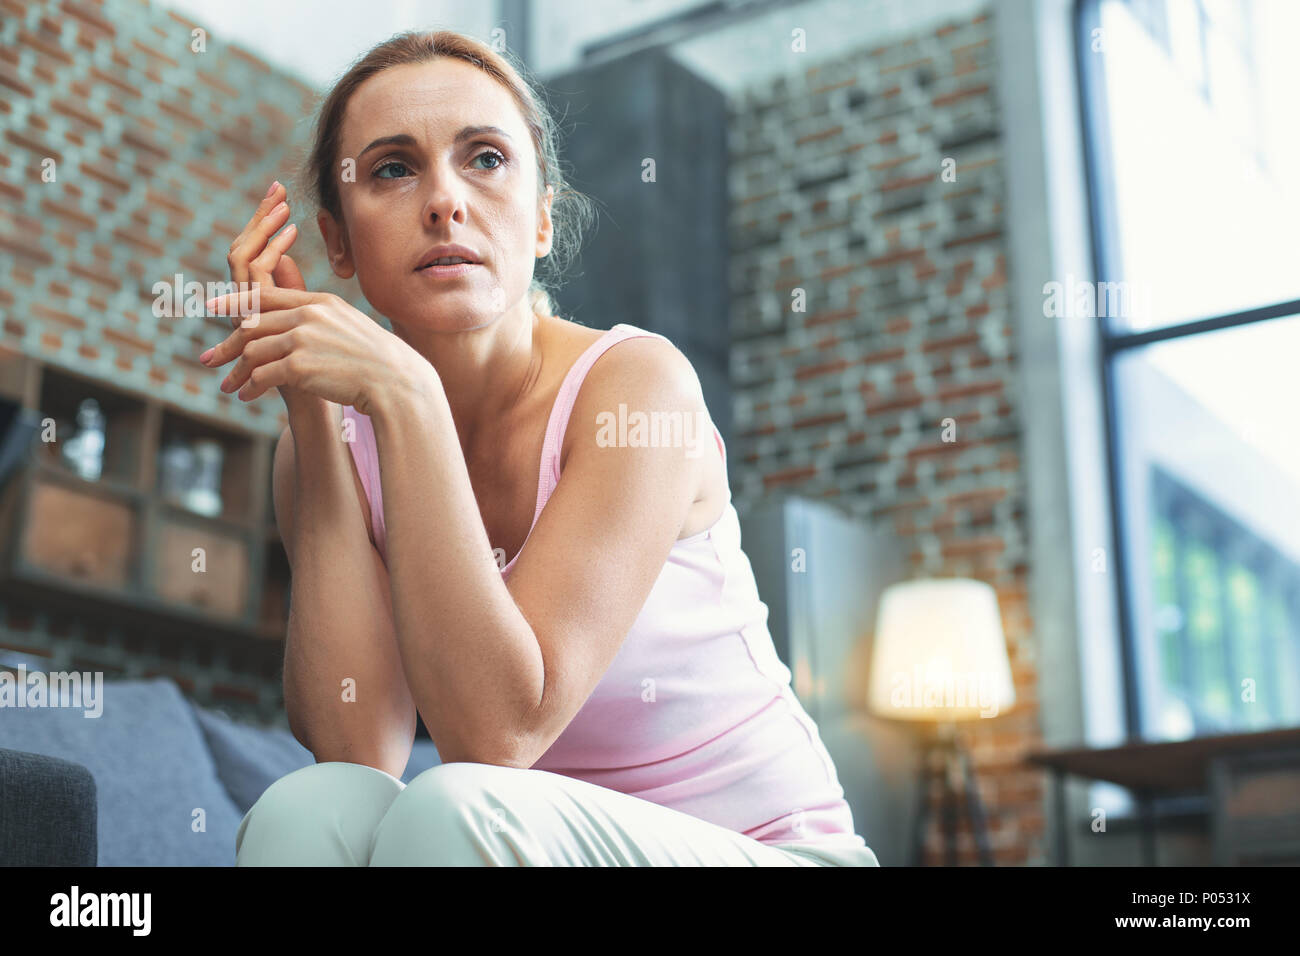 Musing mature woman experiencing helplessness Stock Photo